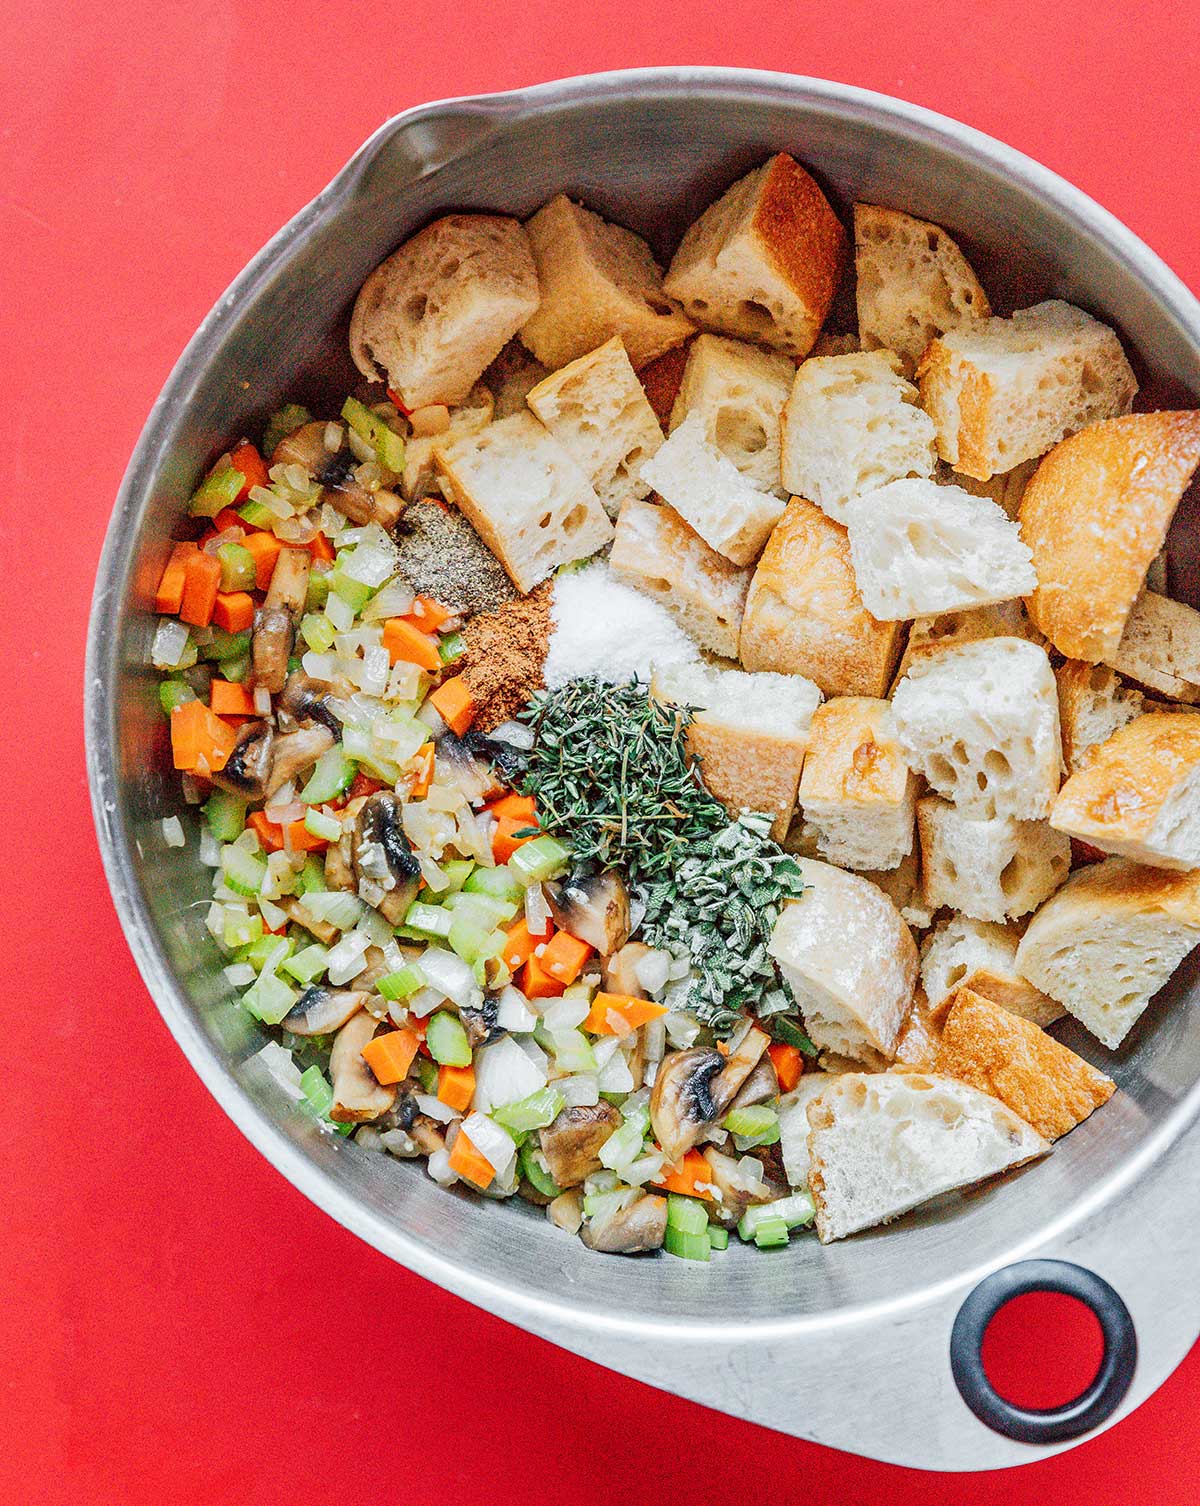 A mixing bowl filled with vegetable bread stuffing ingredients and seasonings 